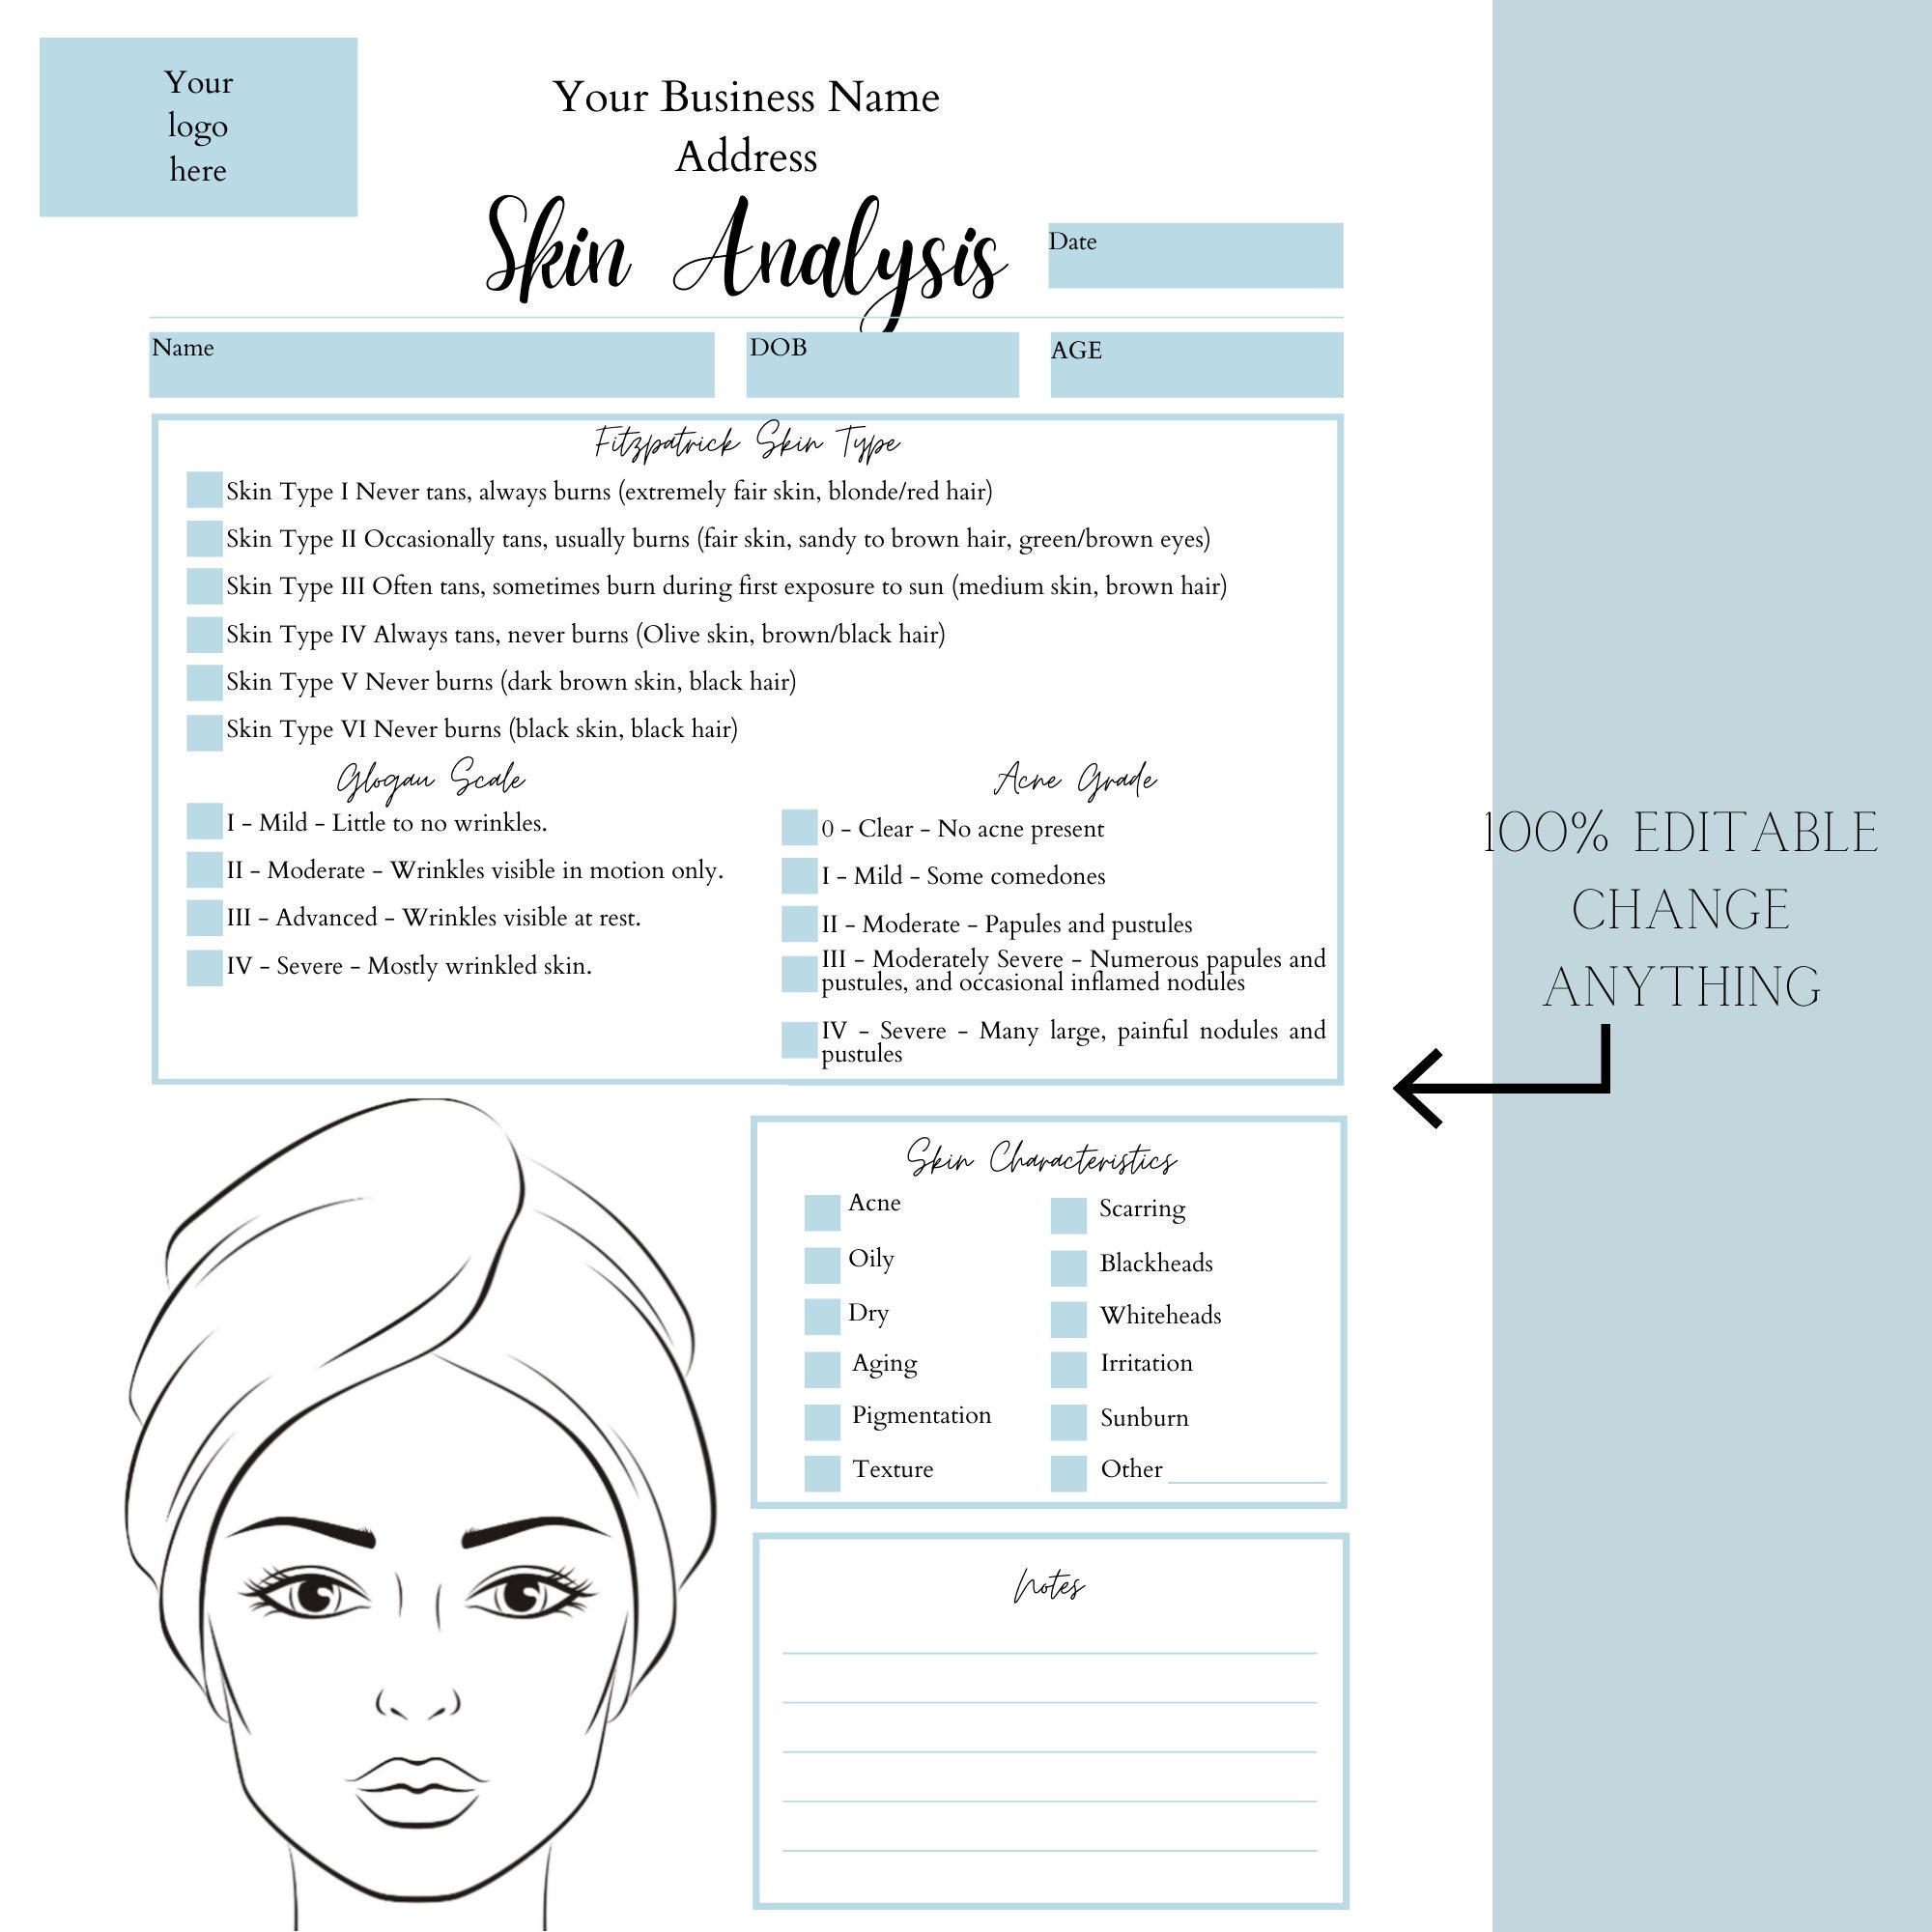 Editable And Printable Skin Analysis Form Template For Estheticians The Best Porn Website